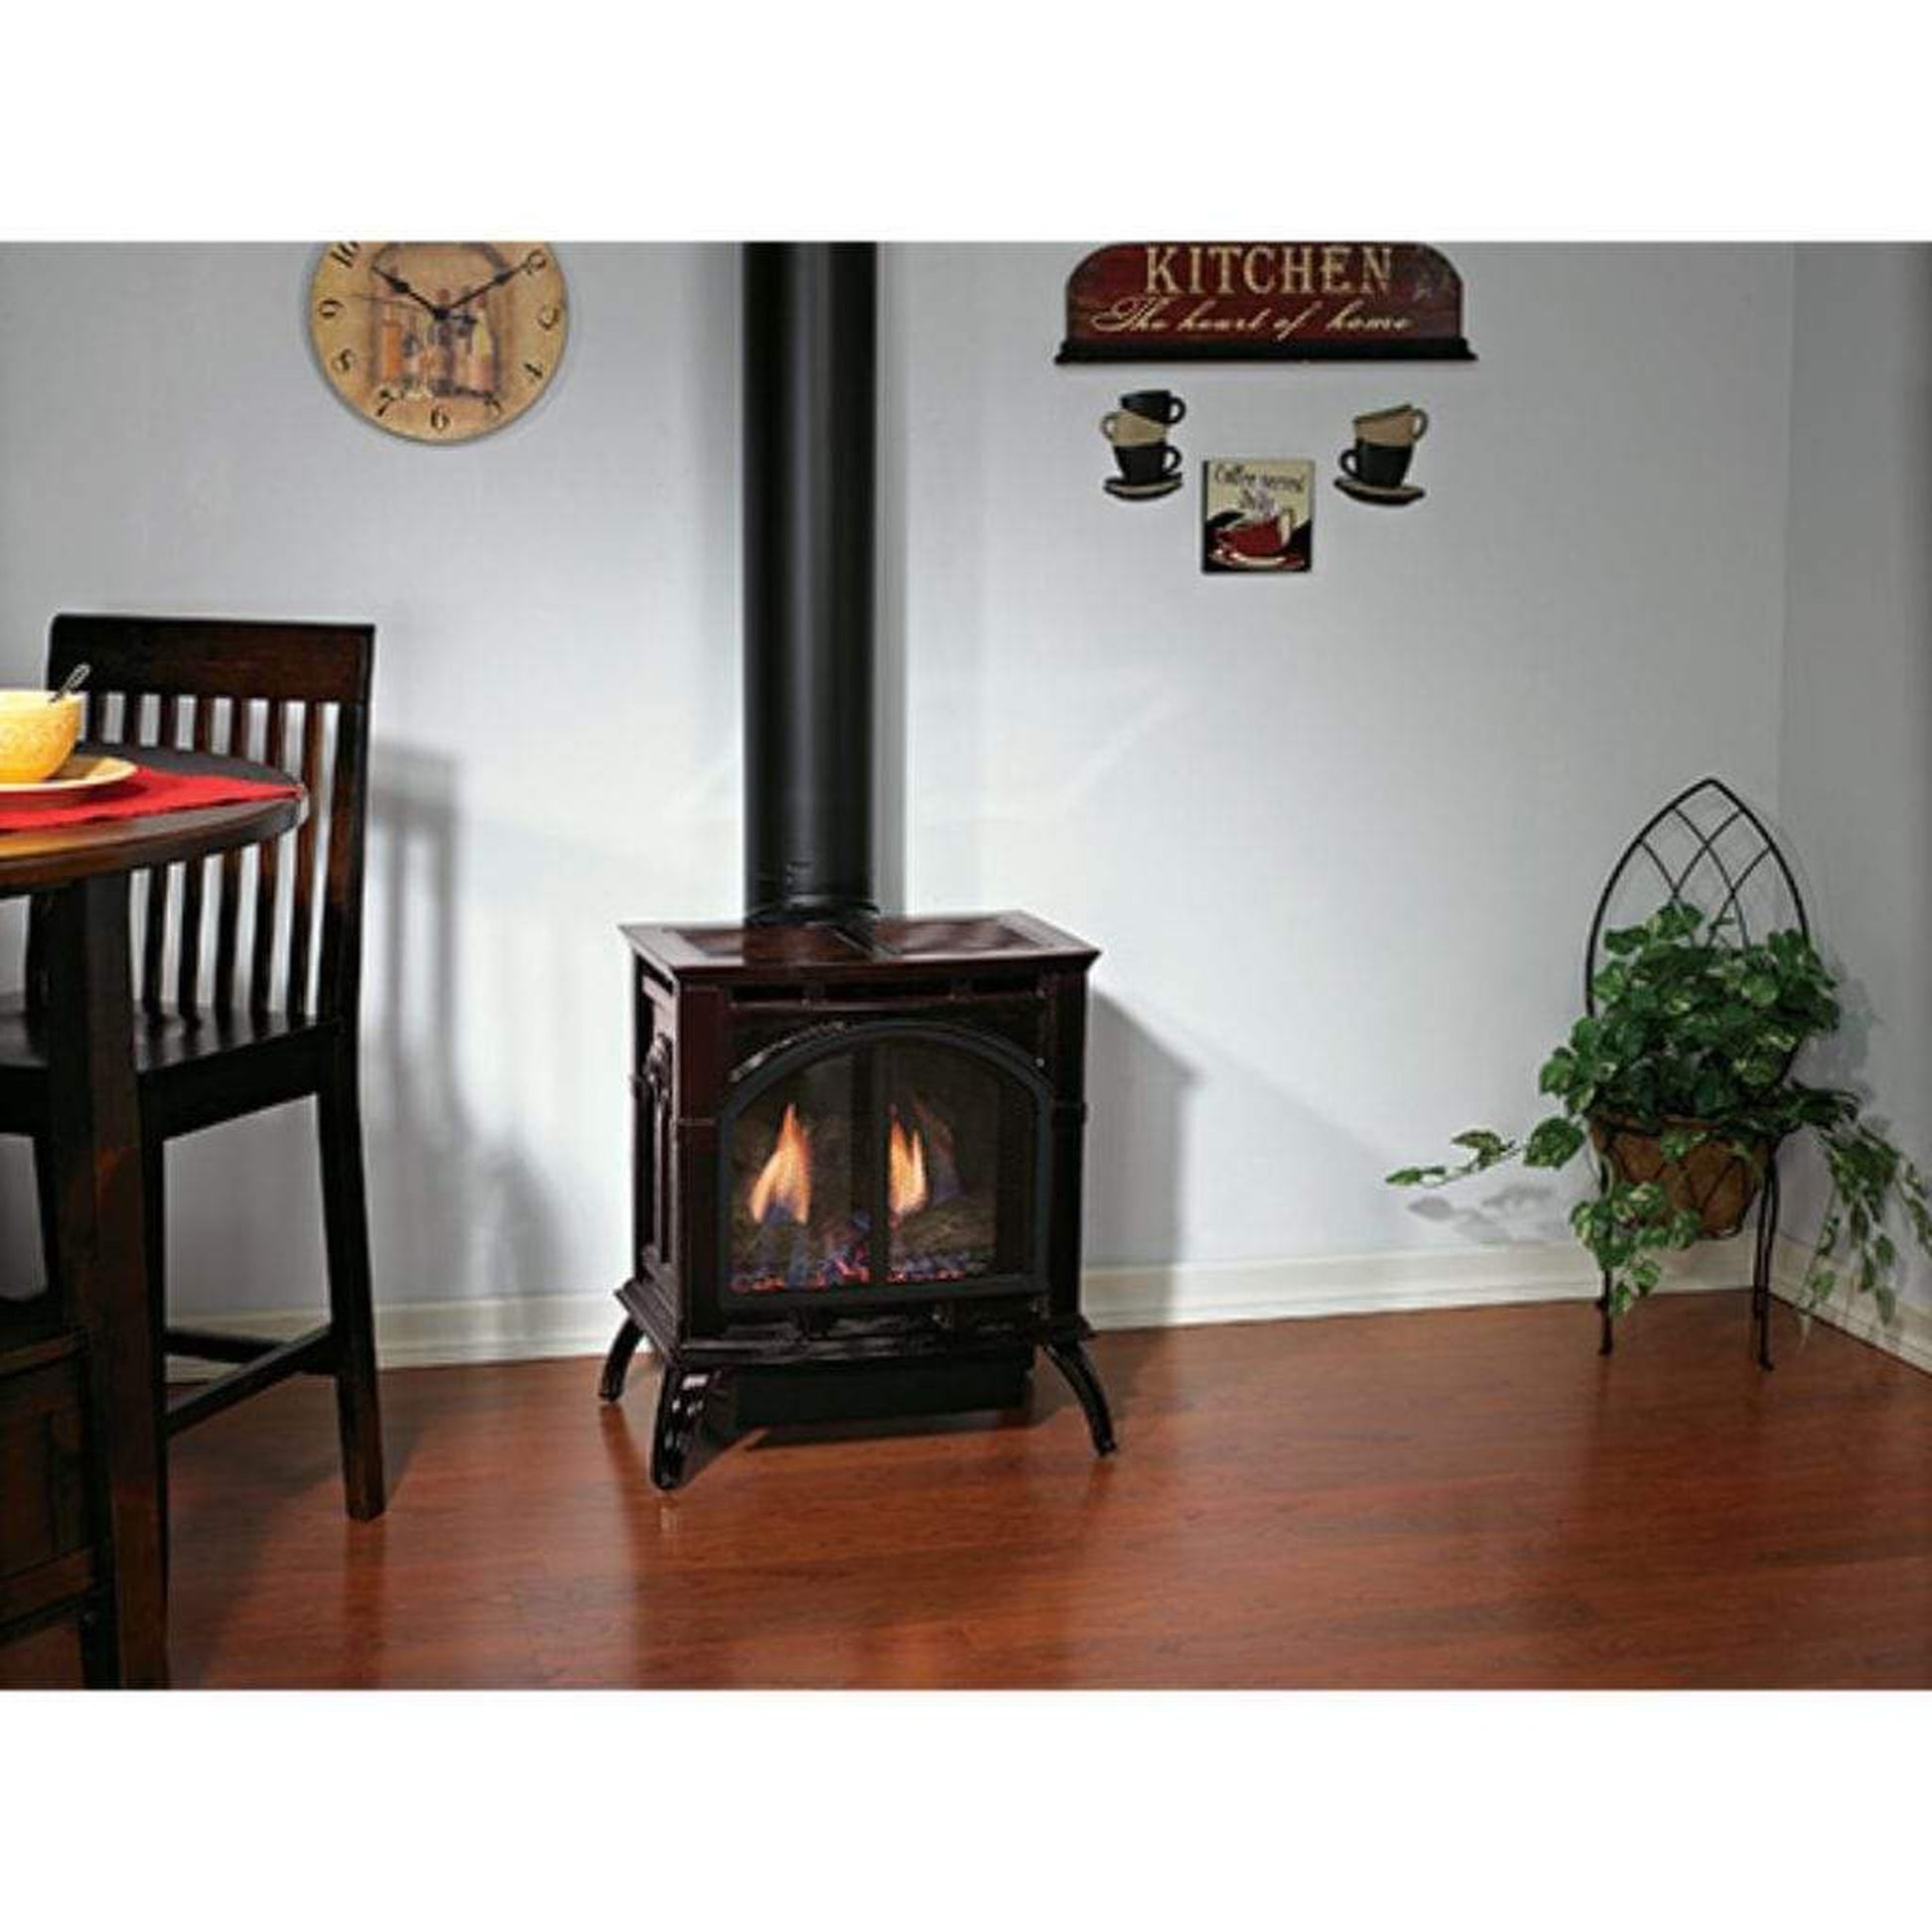 Wood Stove Topper - Cover Your Gas StoveIntroducing our